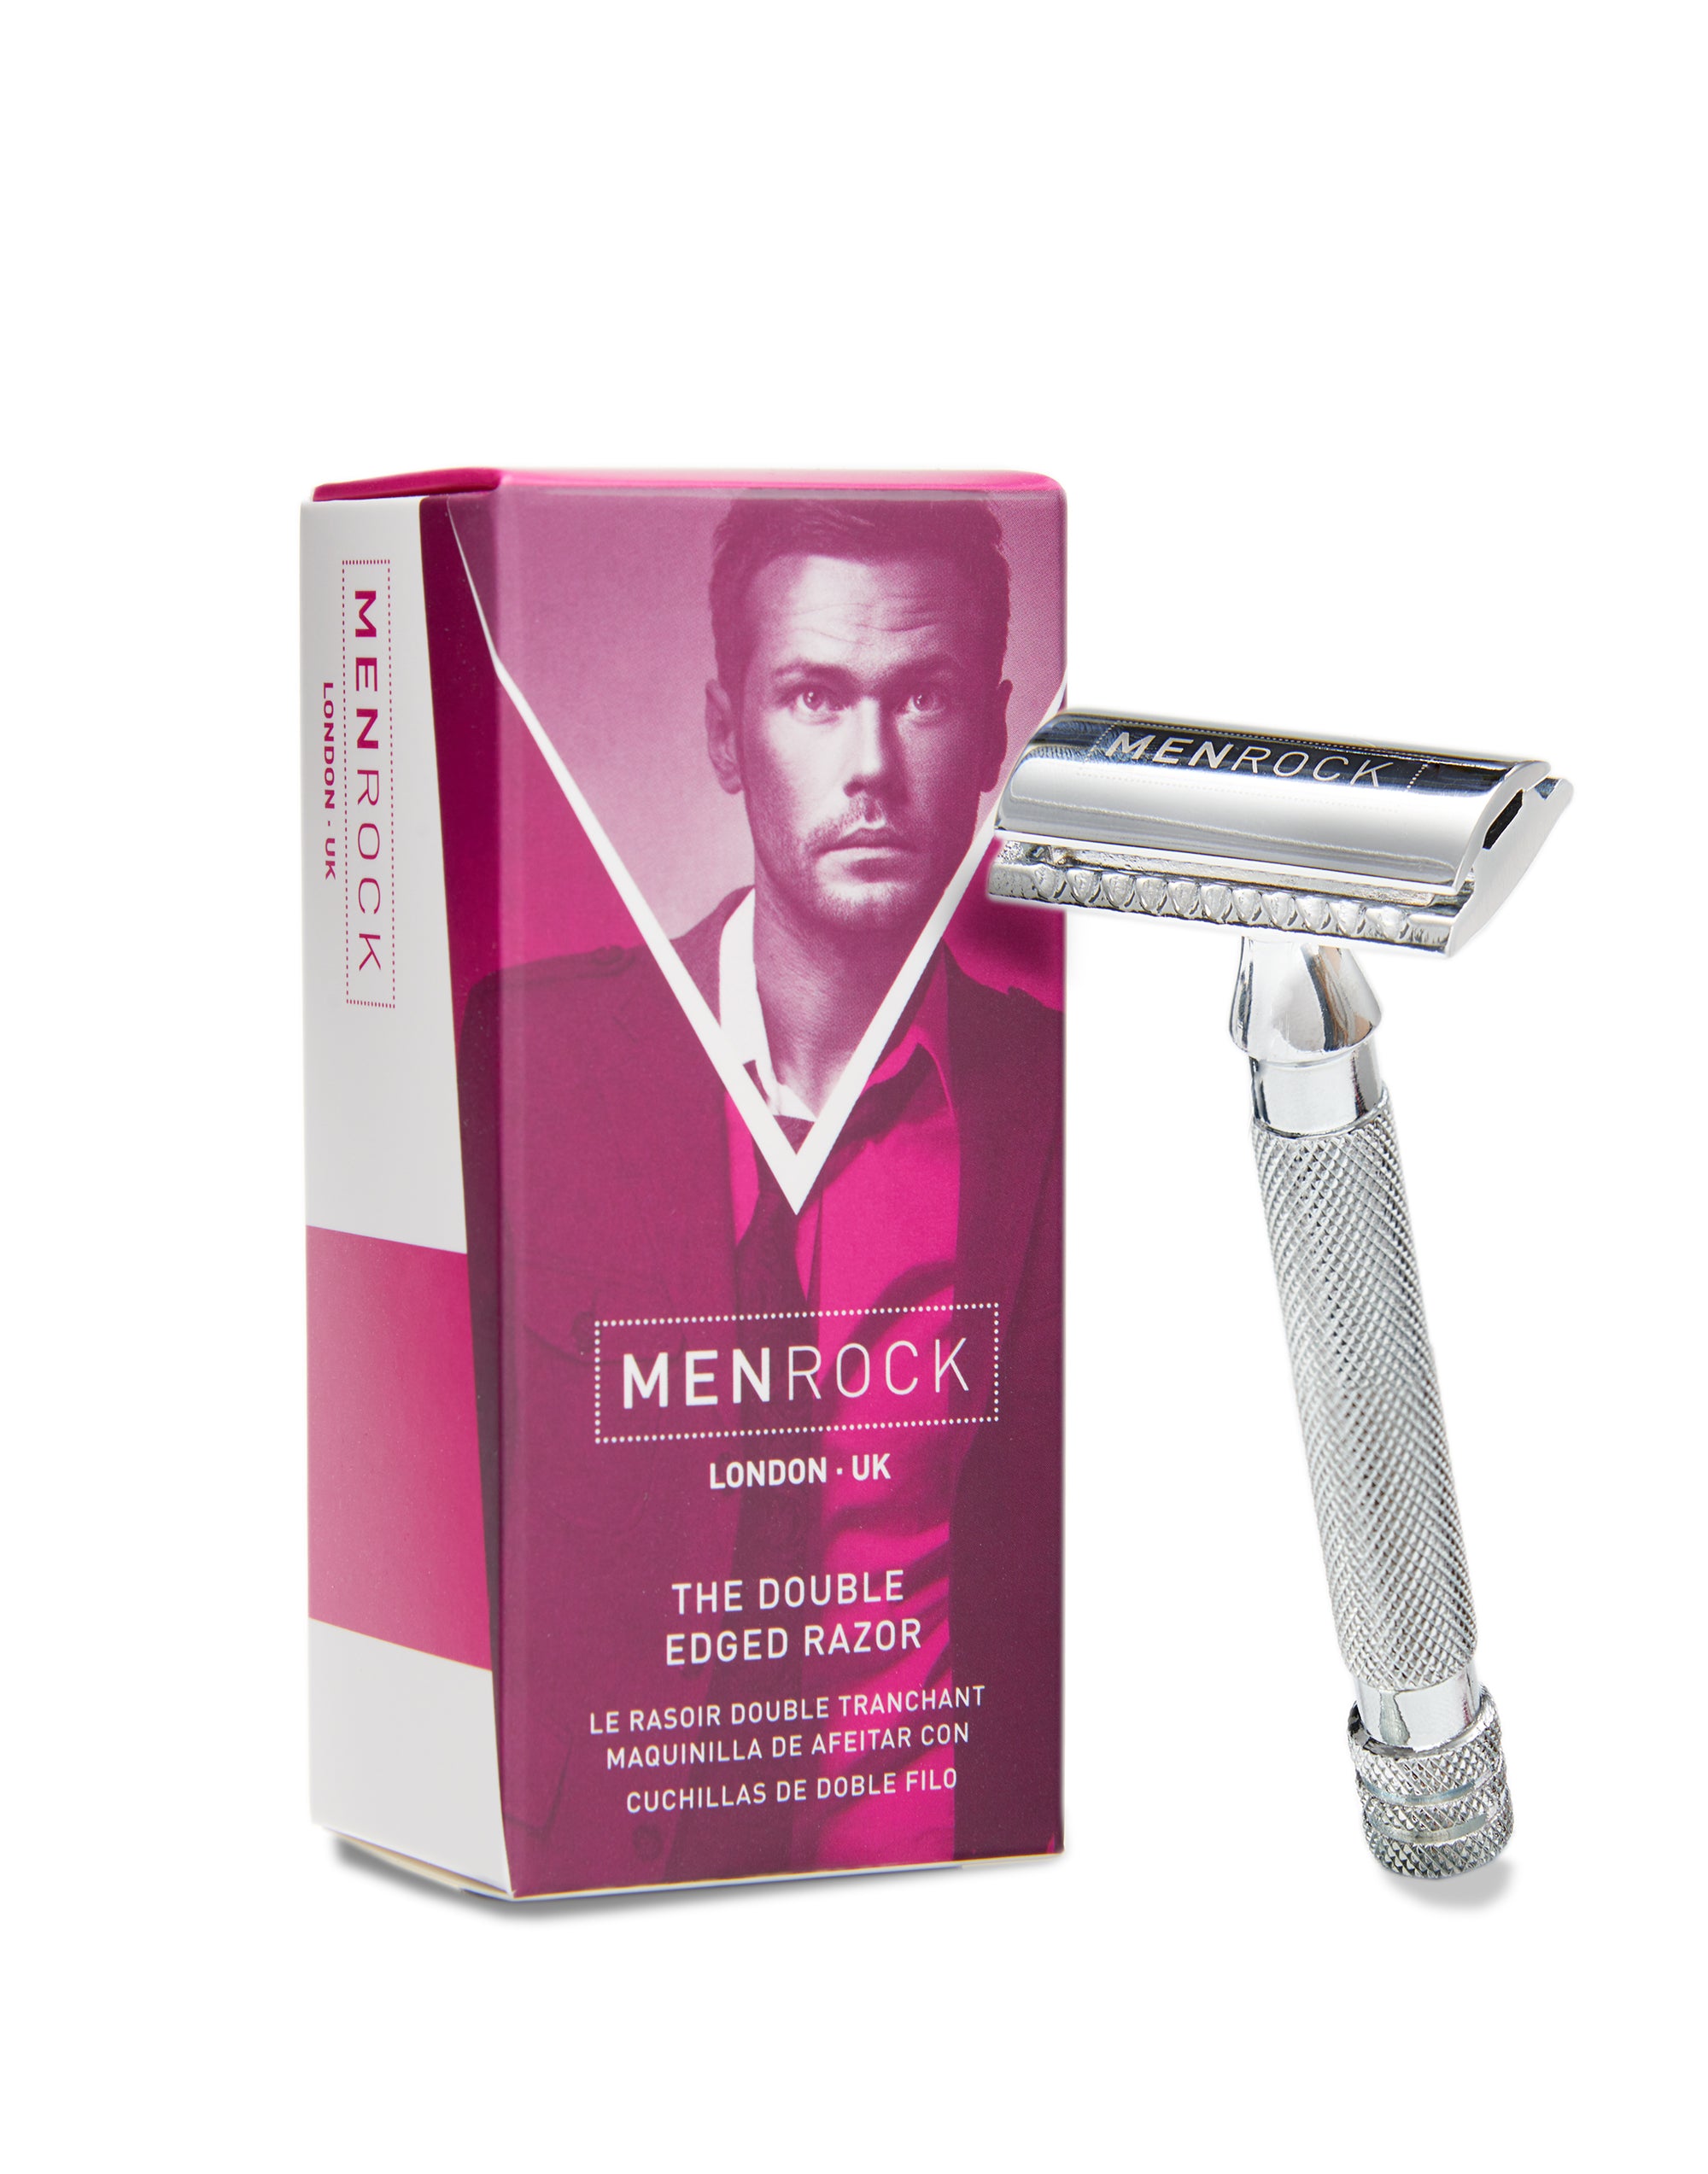 Men Rock Double Edged Razor with a double-edged blade for a smooth wet shave experience. 